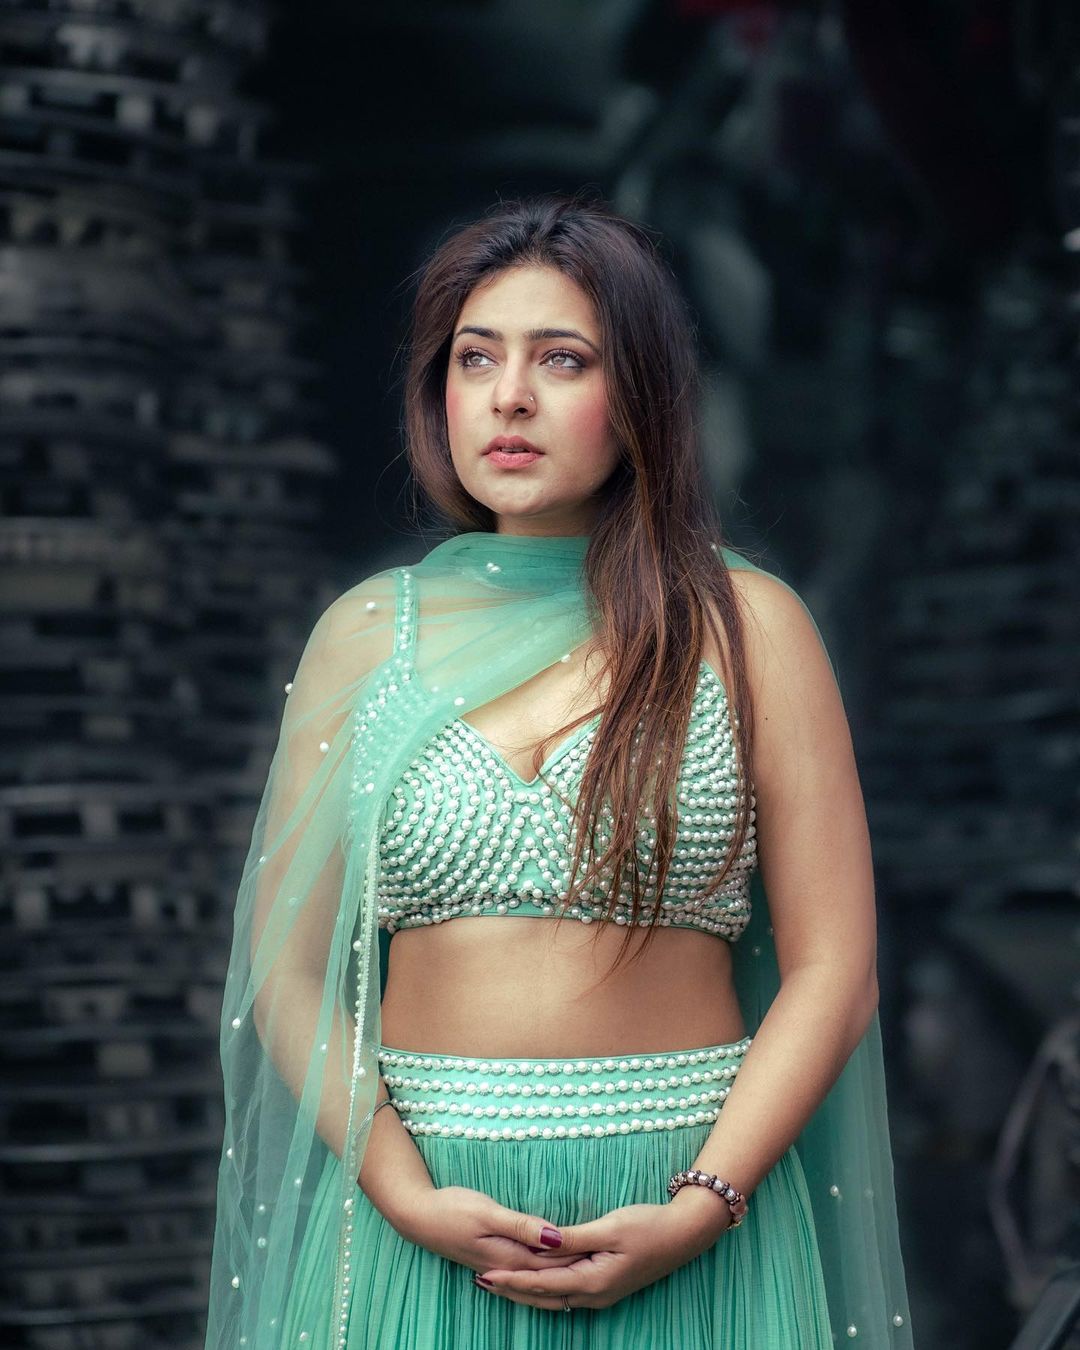 Gorgeous Actress Shiny Dixit Shares Her Experience On The Sets Of Tadap 2! She Says My Character Offered Me To Portray A Variety Of Emotions On-Screen.